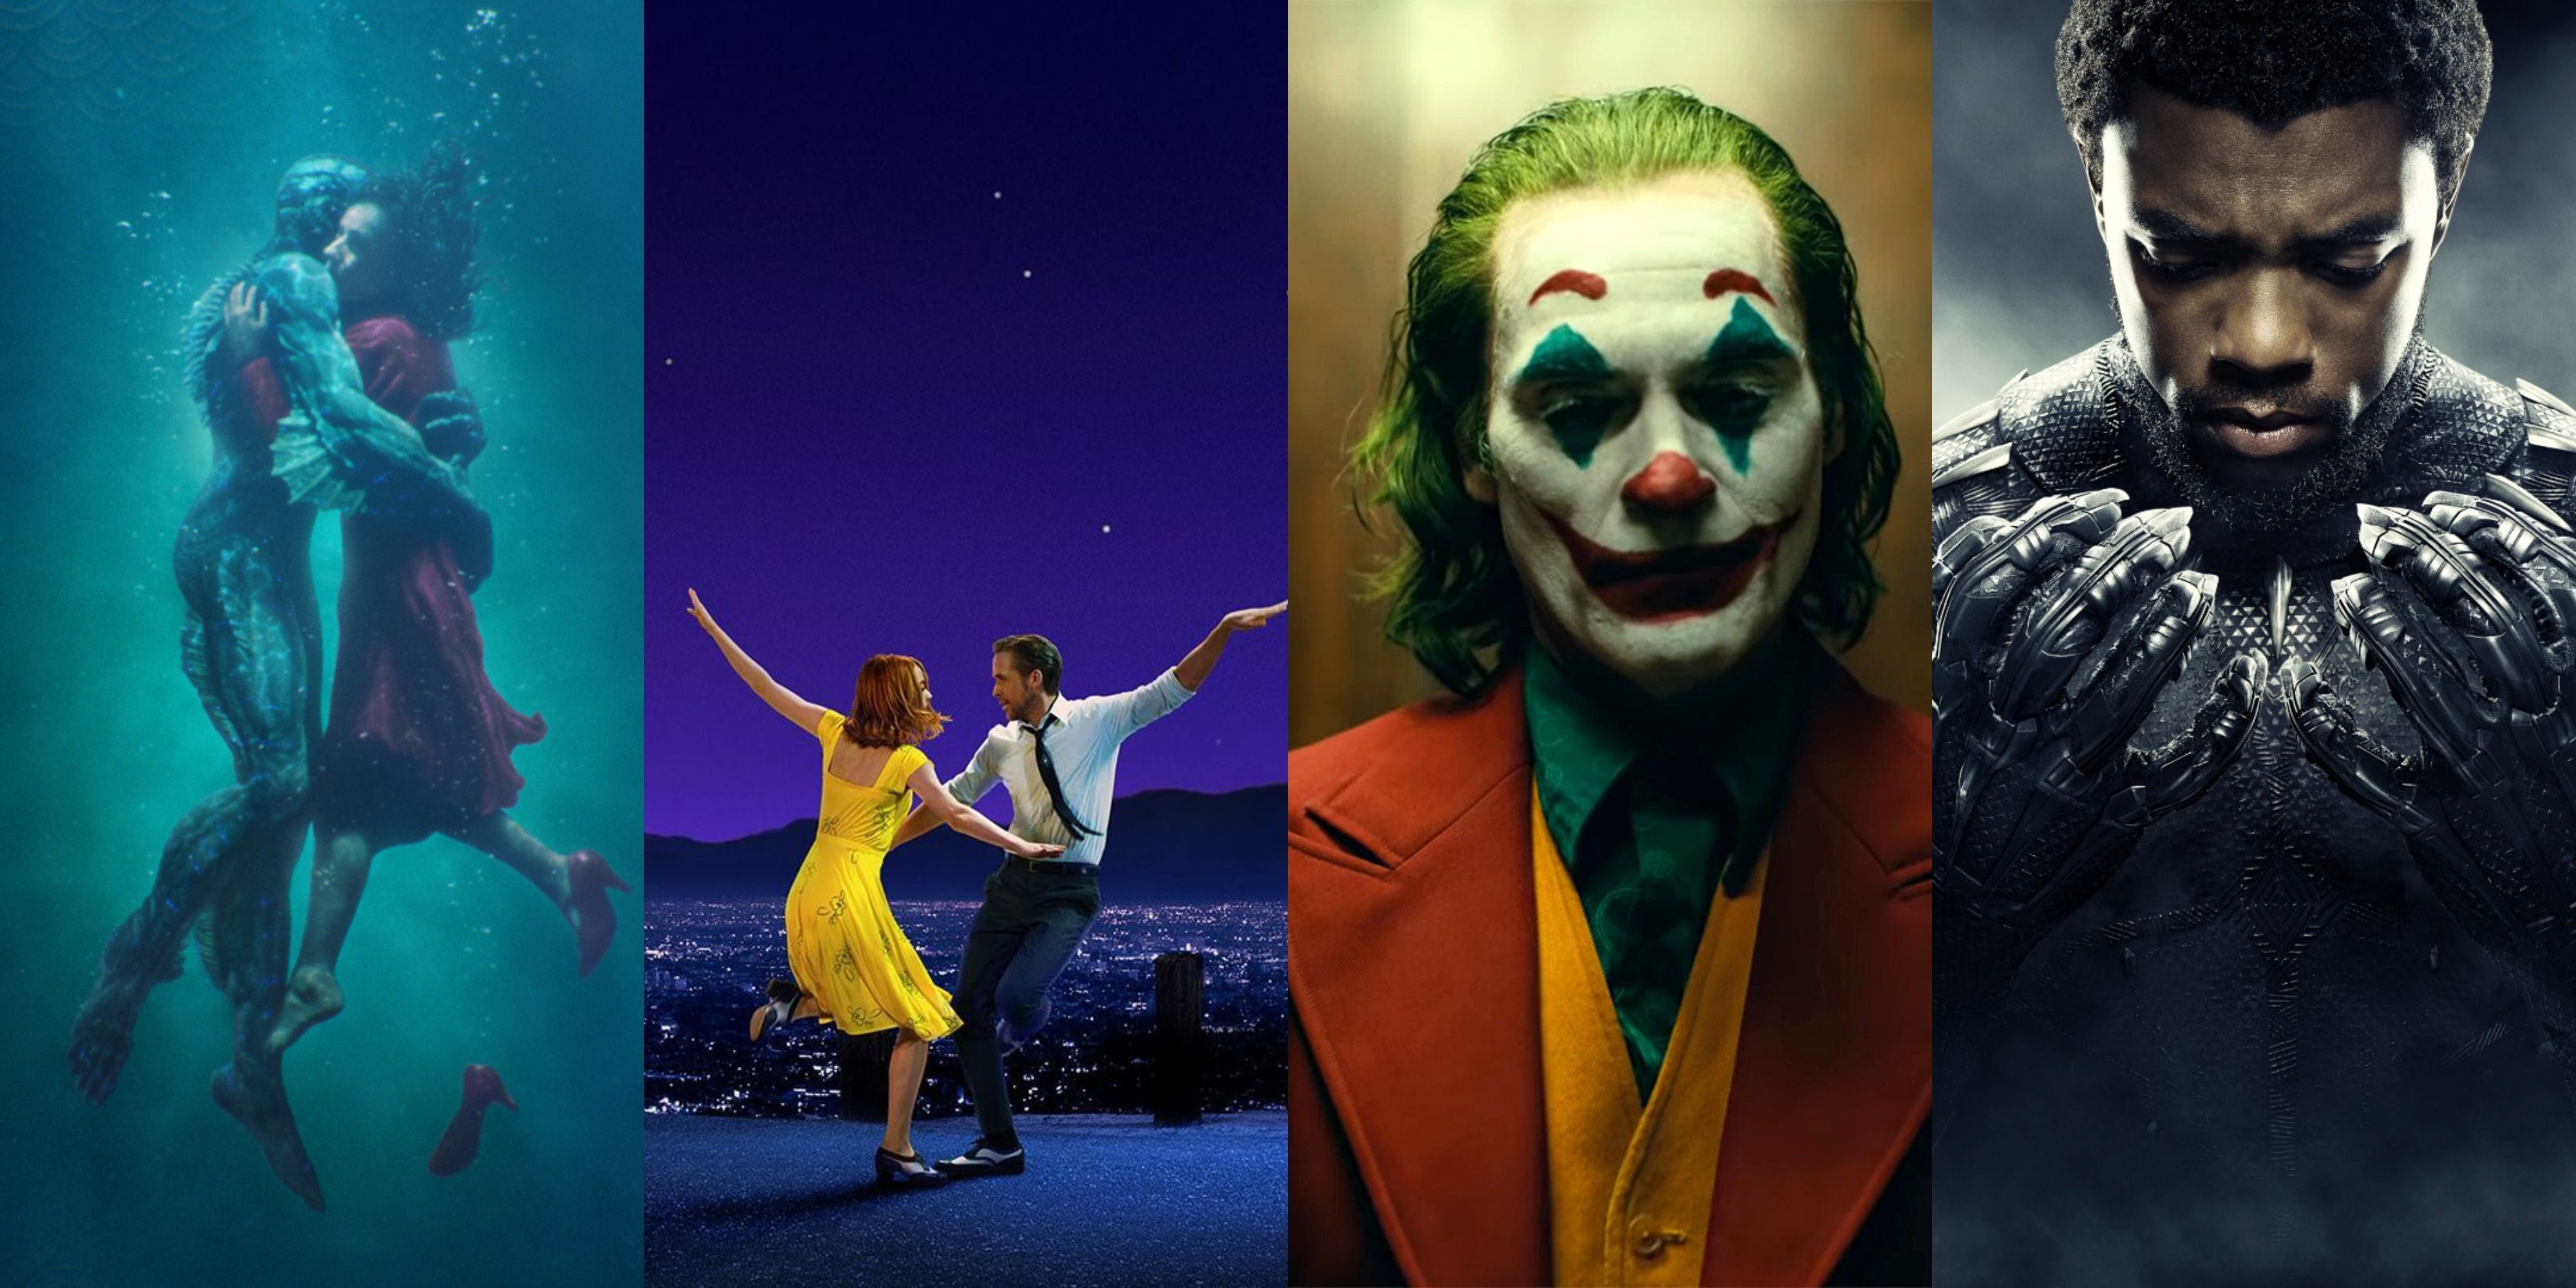 combined images of La La Land, Joker, Black Panther, and The Shape of Water